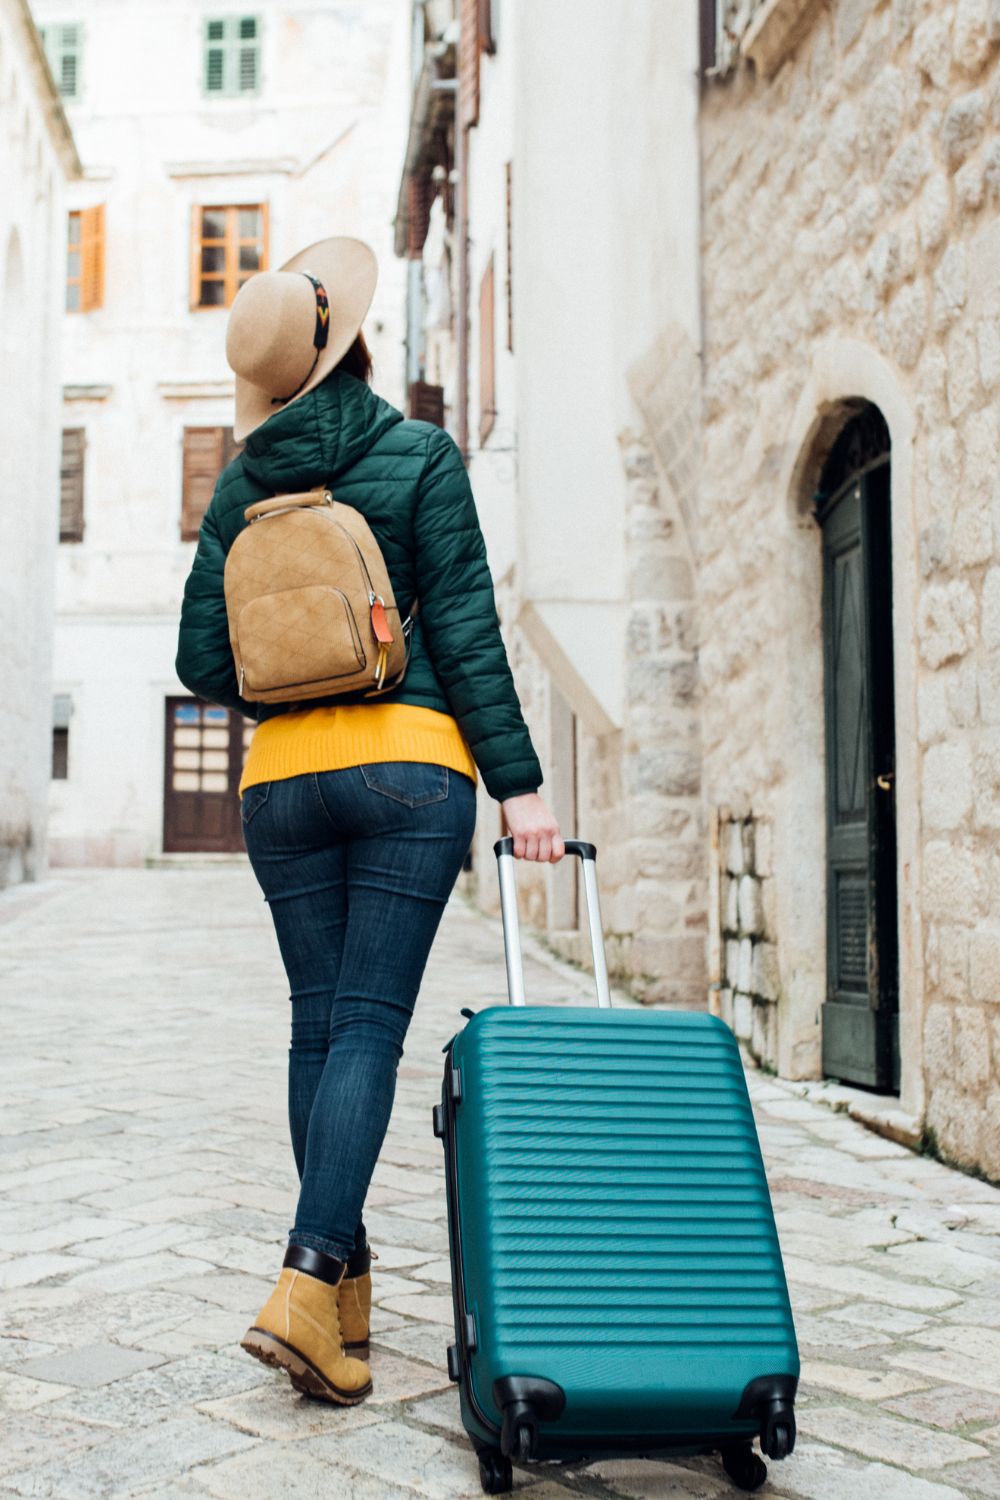 Woman Carrying Luggage